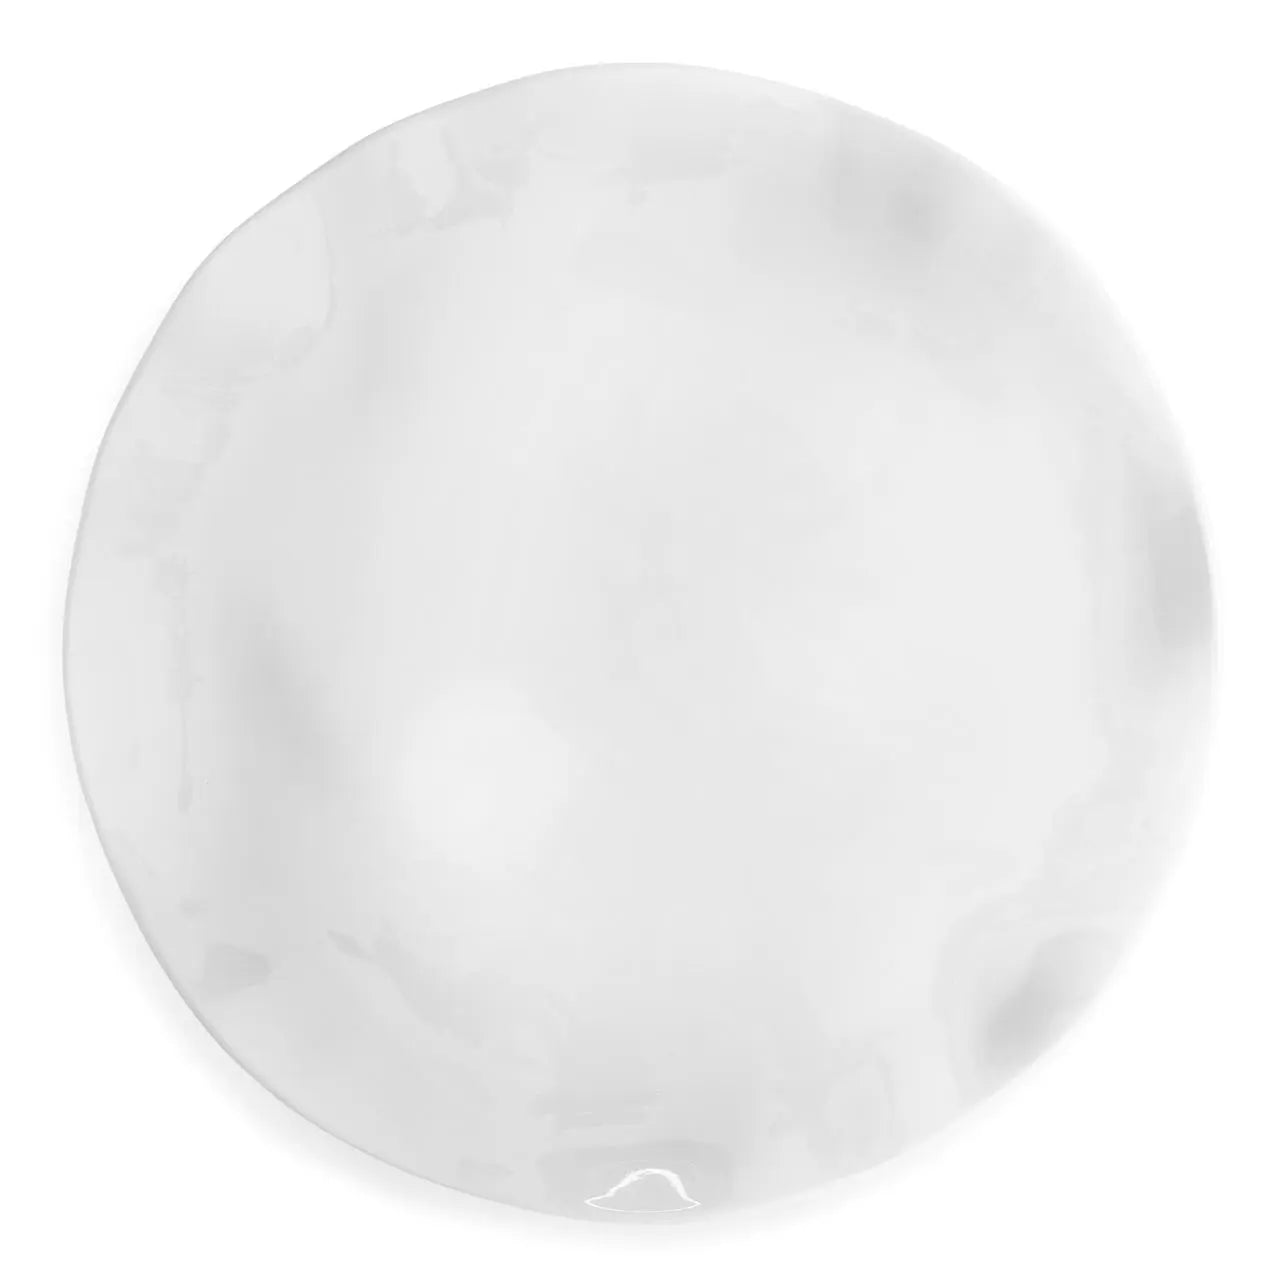 Q Squared Luxe White Ruffle ROUND Salad Plate